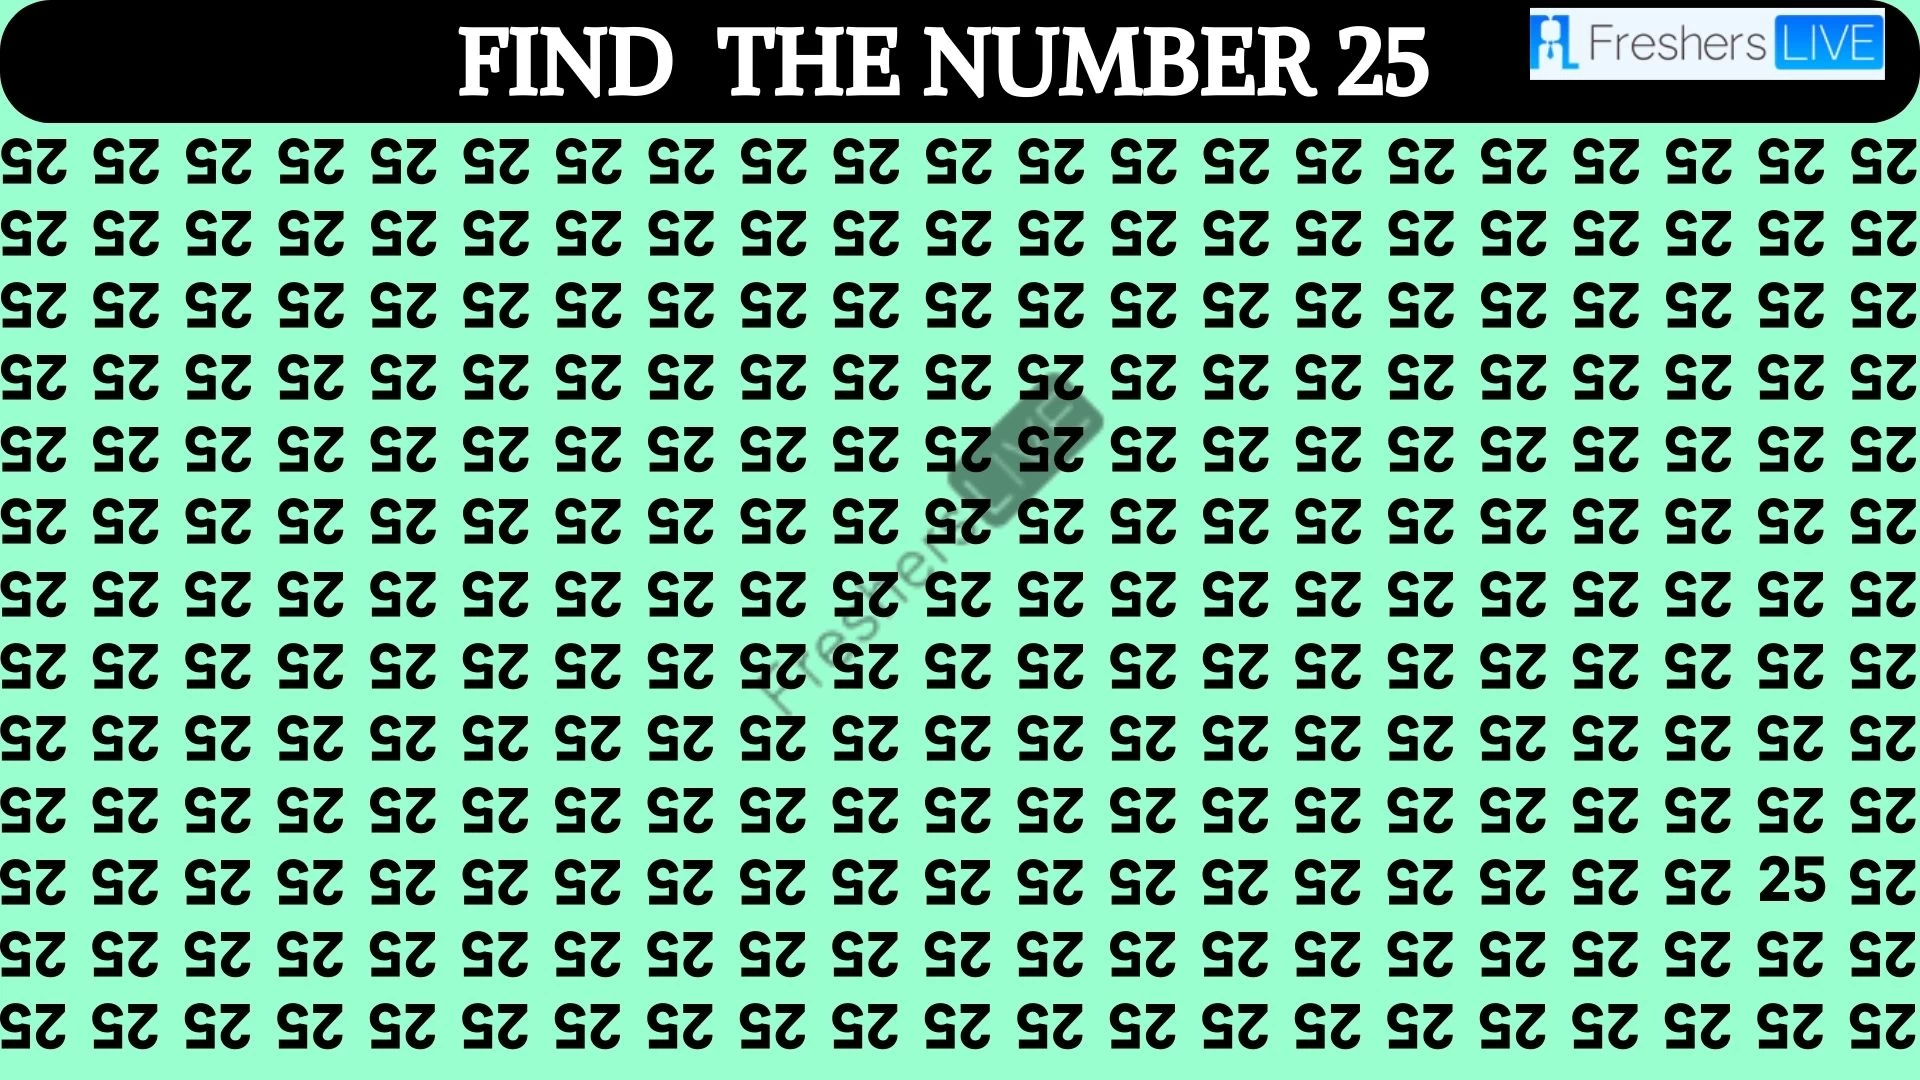 Only 50/50 HD Vision People Can Find The Number 25 In 12 Seconds